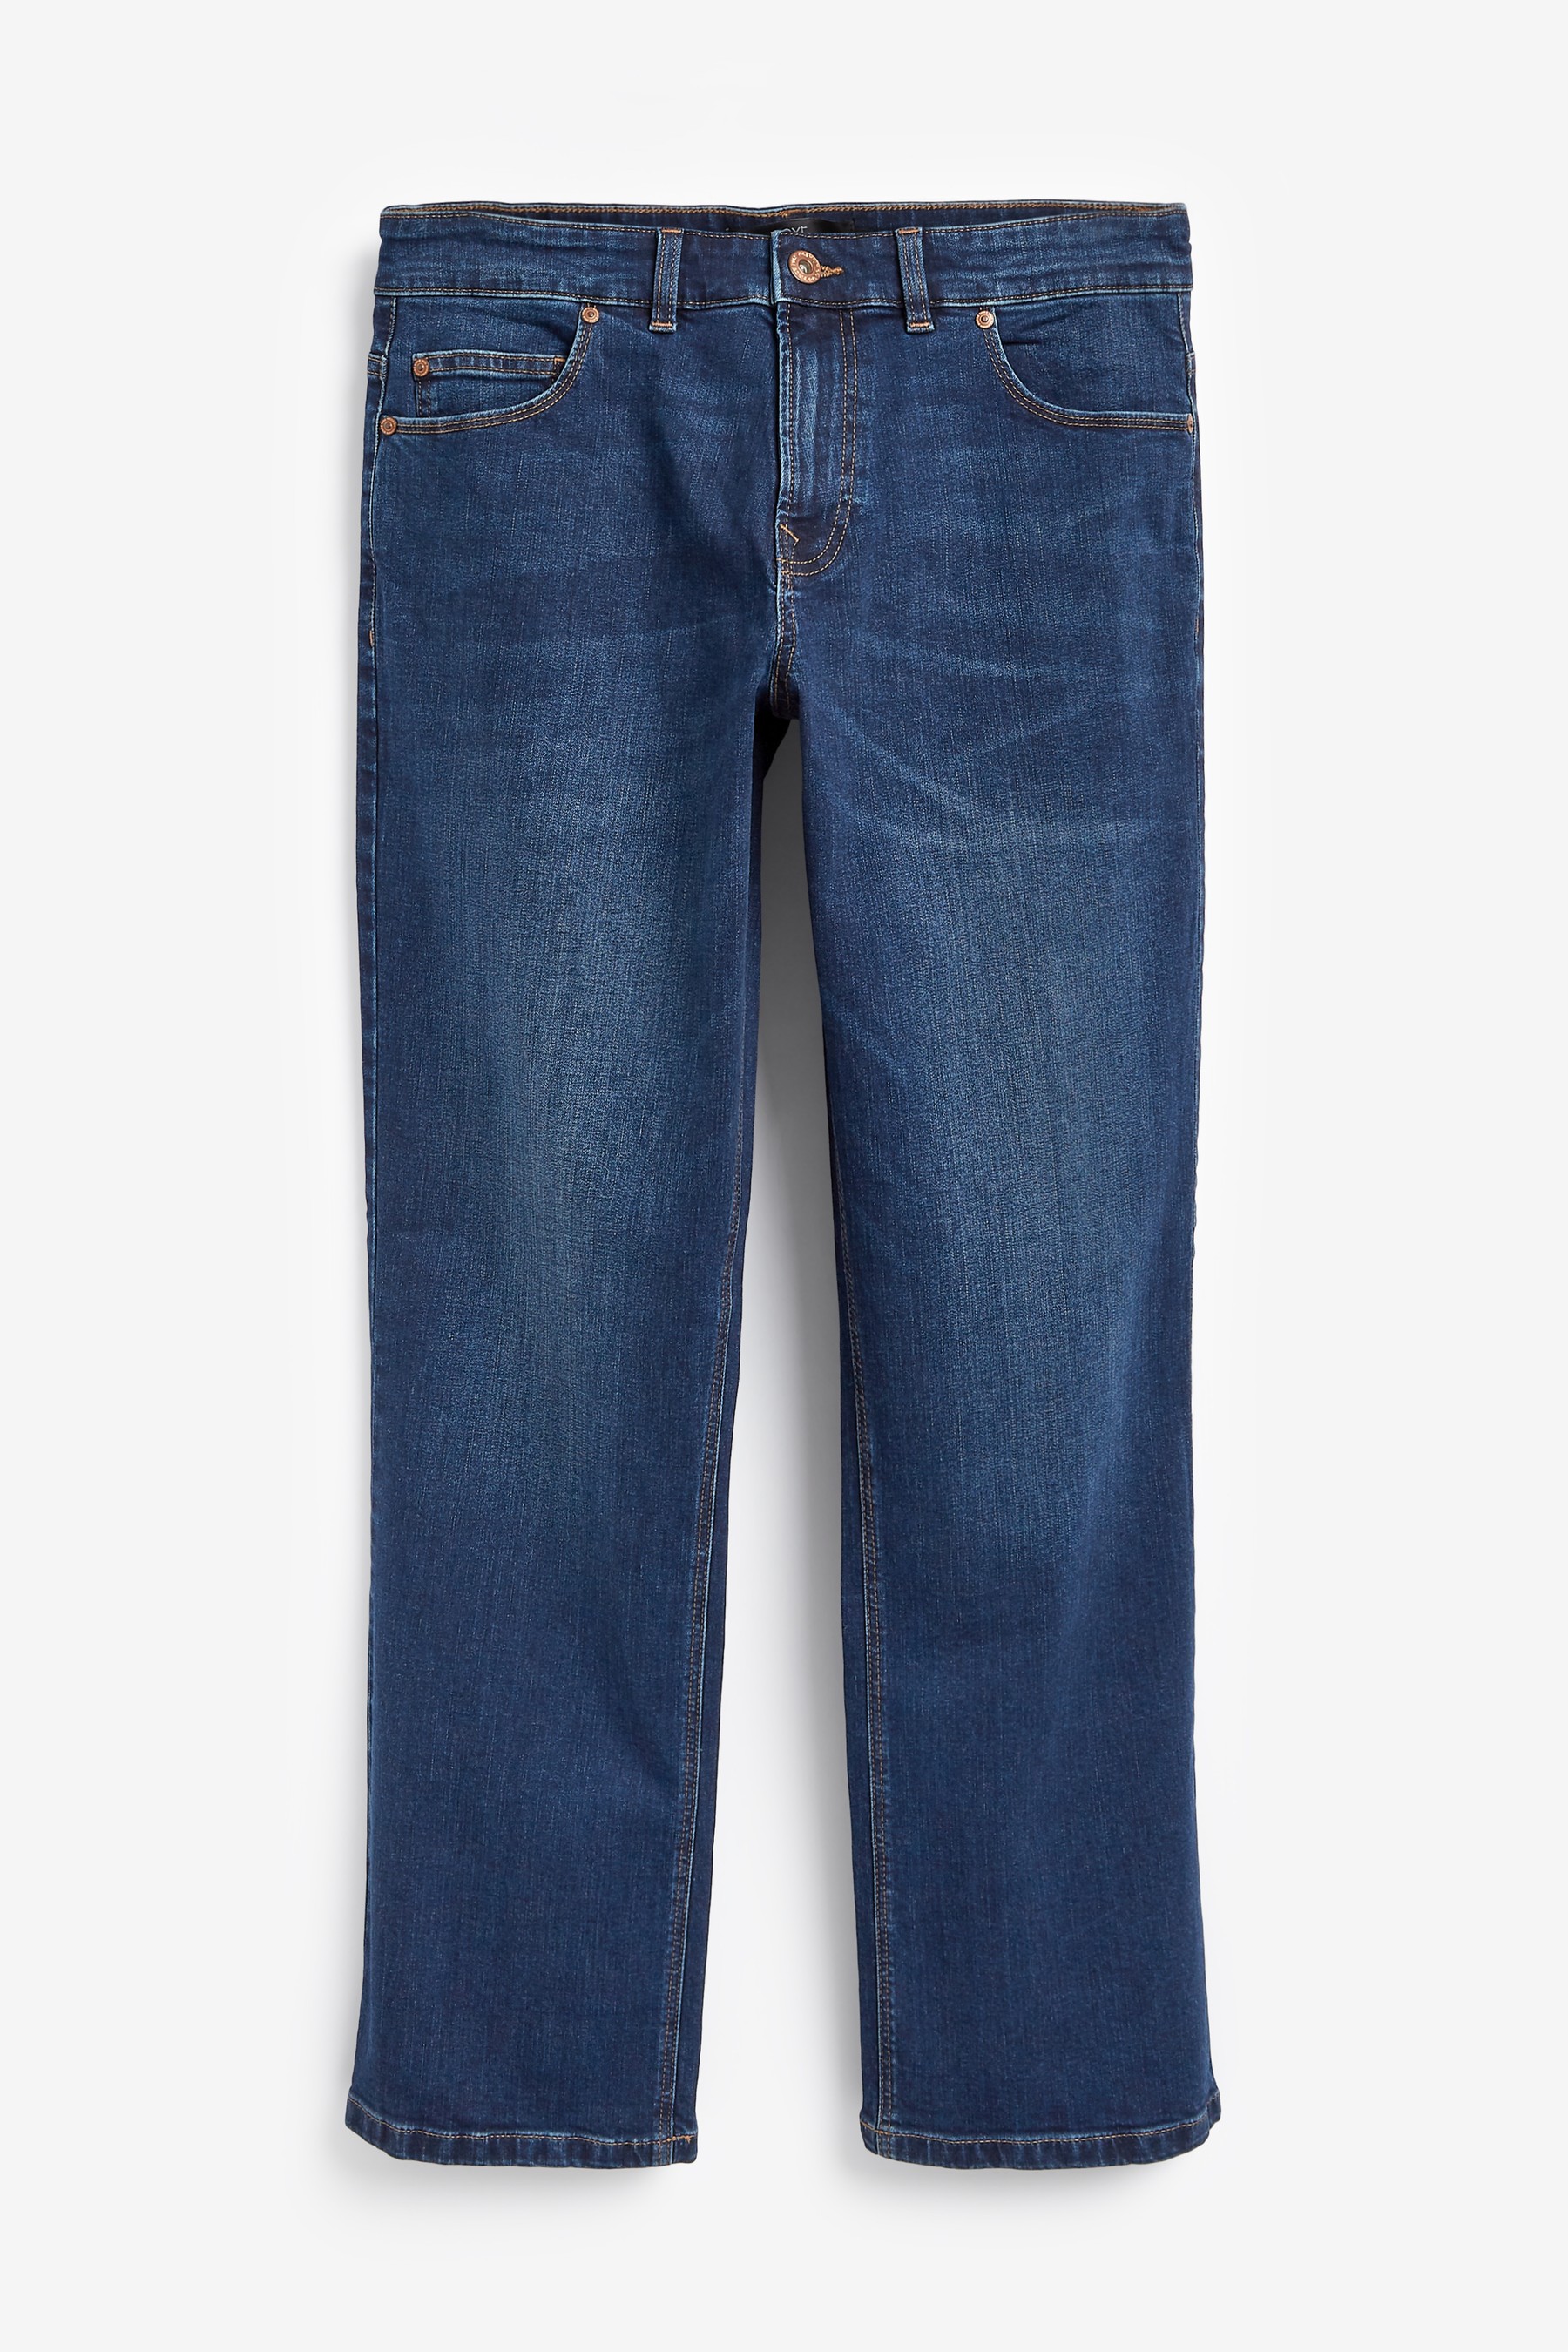 Essential Stretch Jeans Bootcut Fit